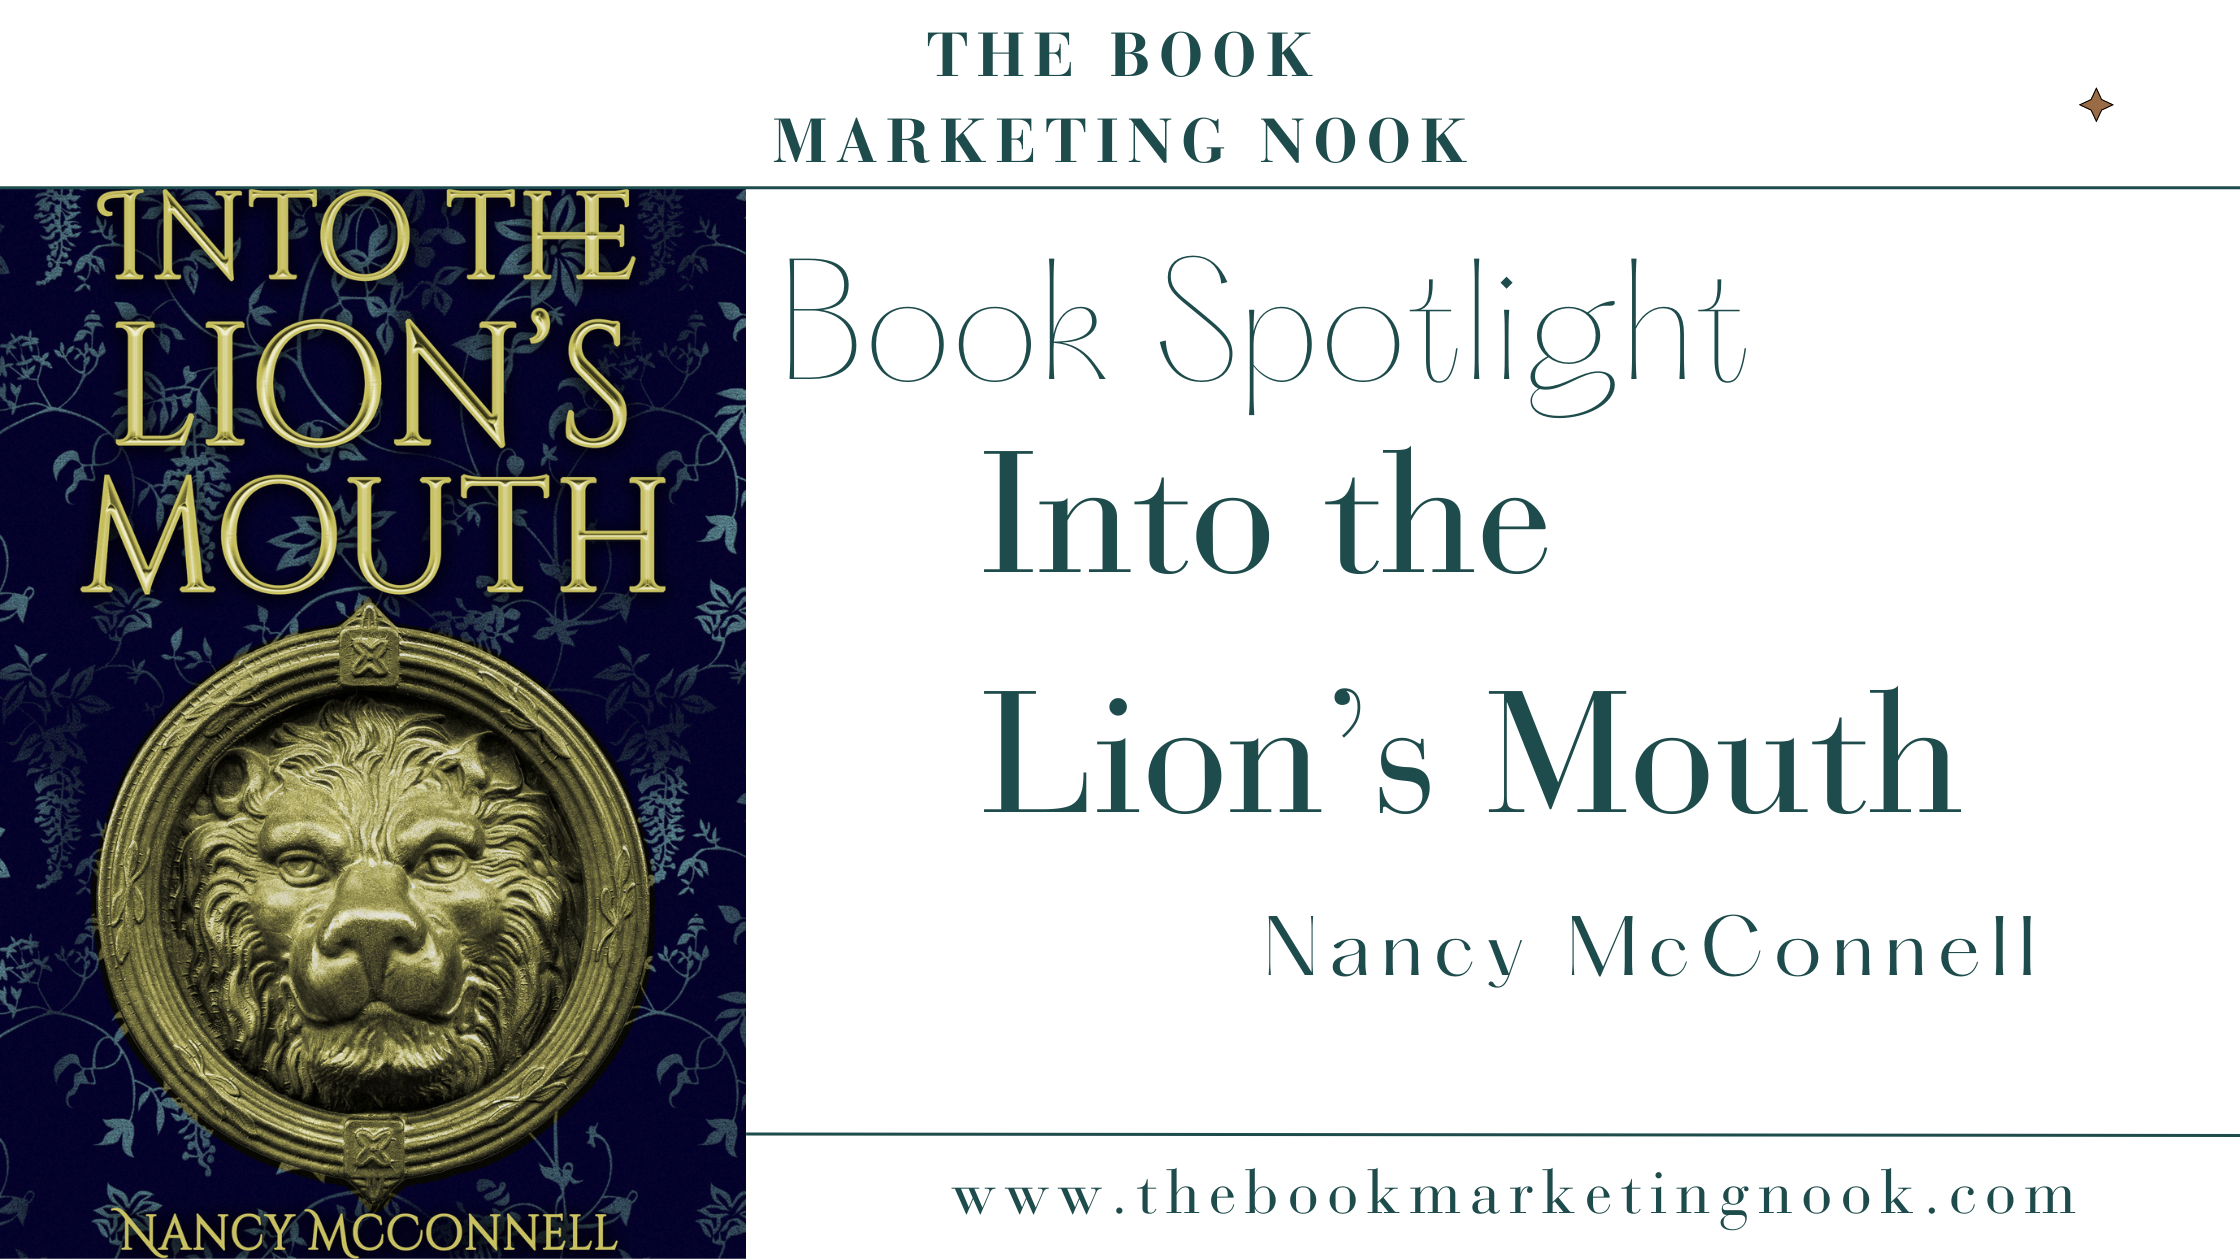 Book Spotlight: Into the Lion’s Mouth by Nancy McConnell